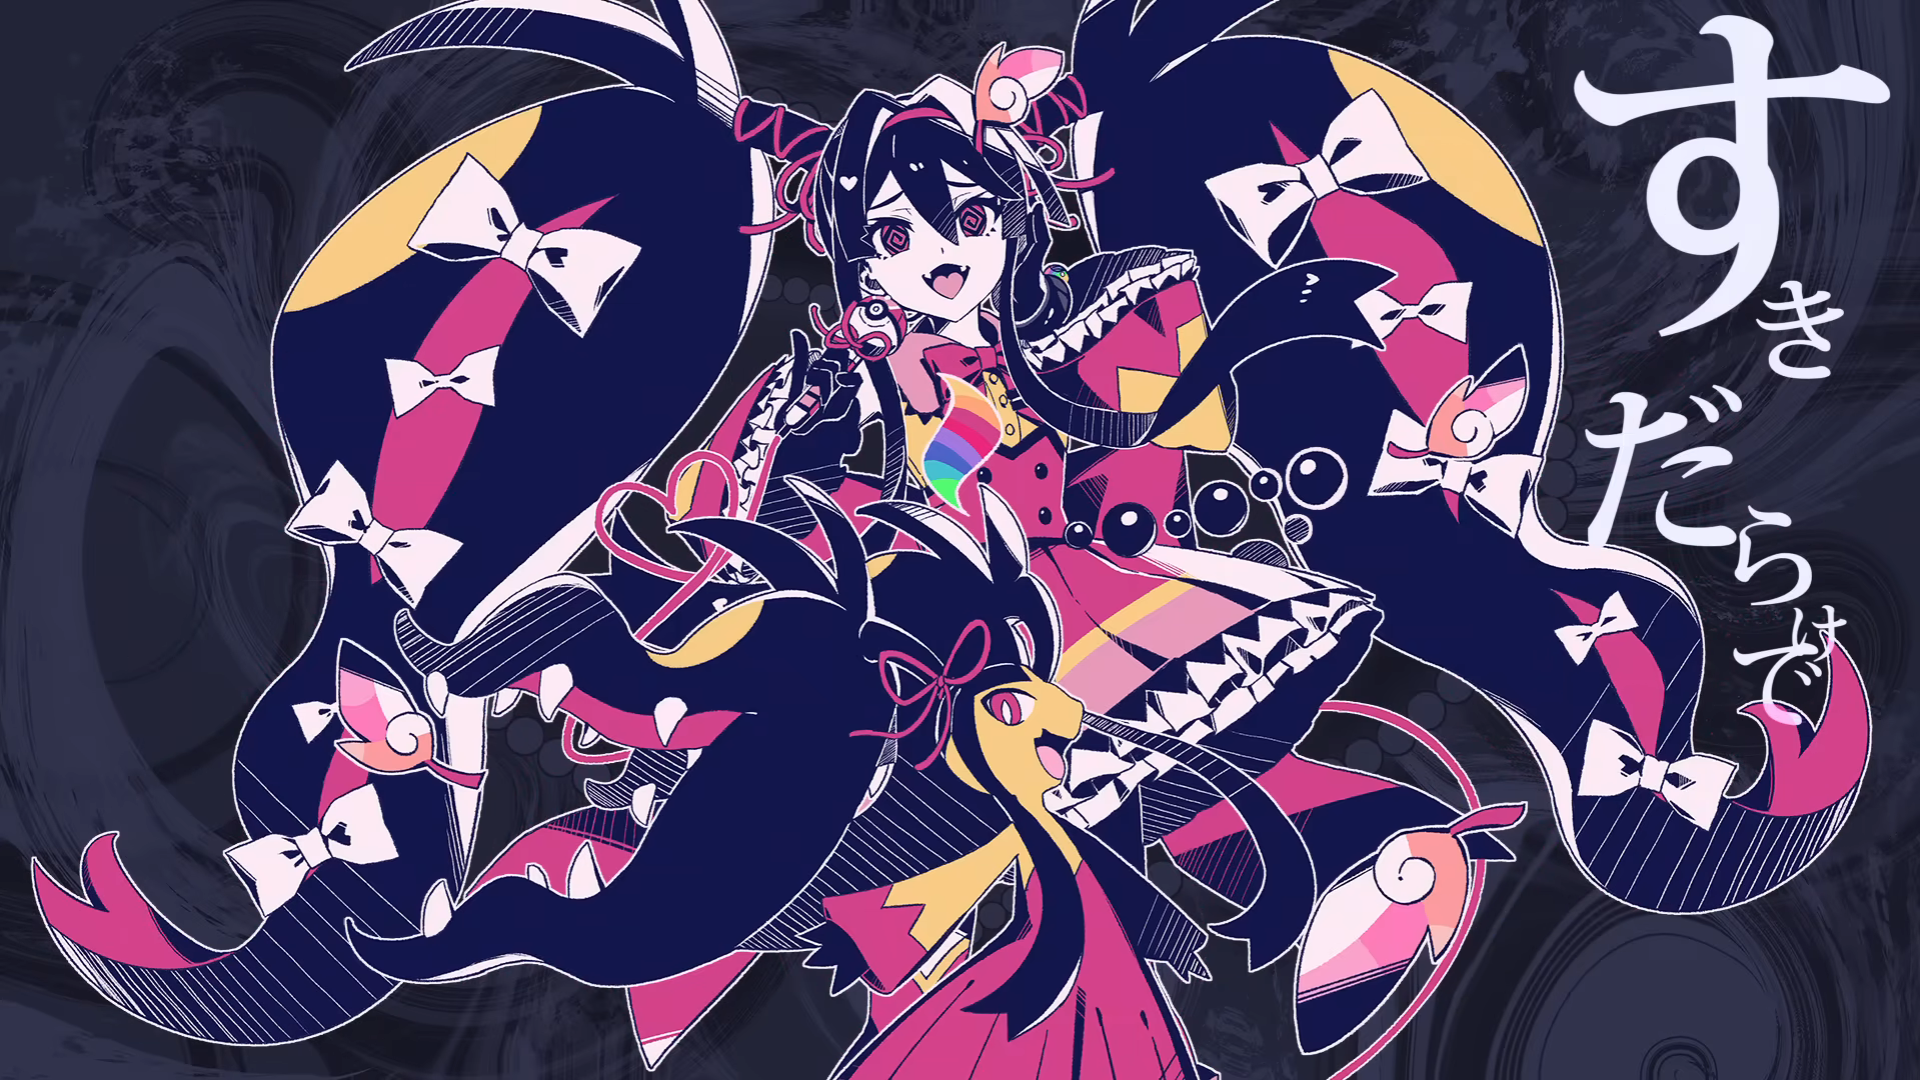 Hatsune Miku Pokémon Project Voltage Collab Launches Seventeenth Song, “Melomeloid”